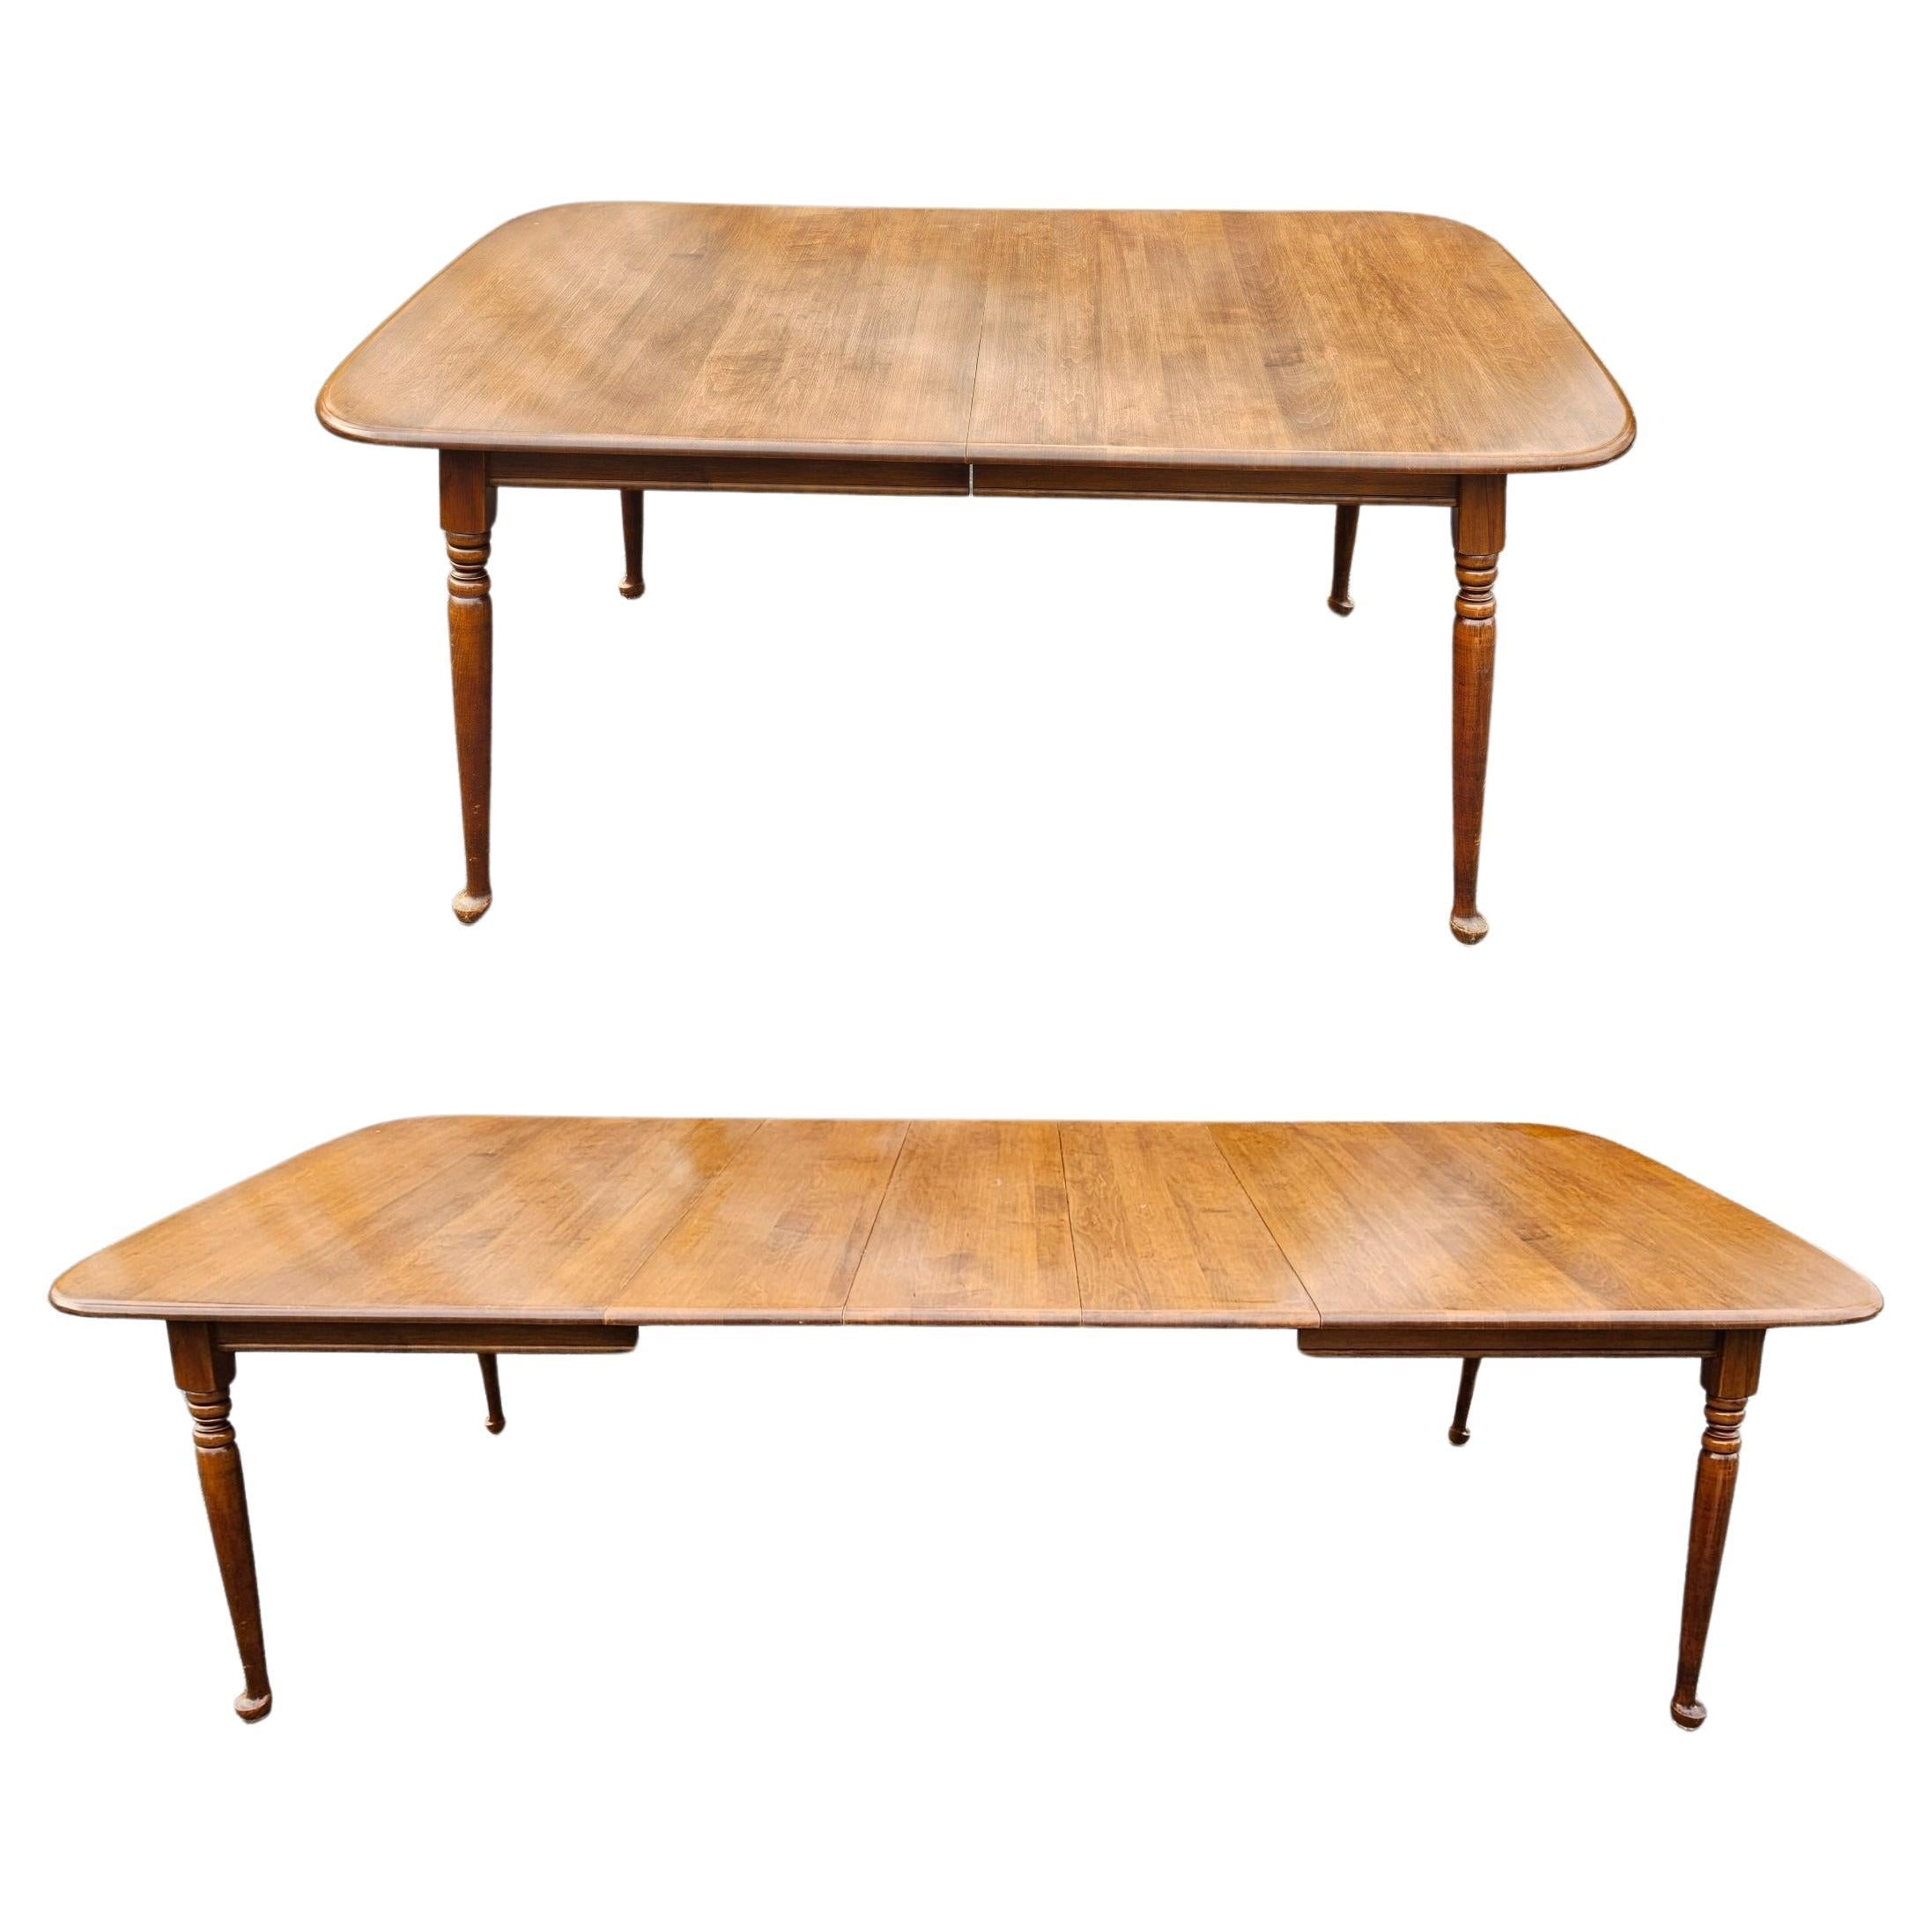 Heywood Wakefield Maple Cinnamon Colonial Style Extension Dining Table For Sale